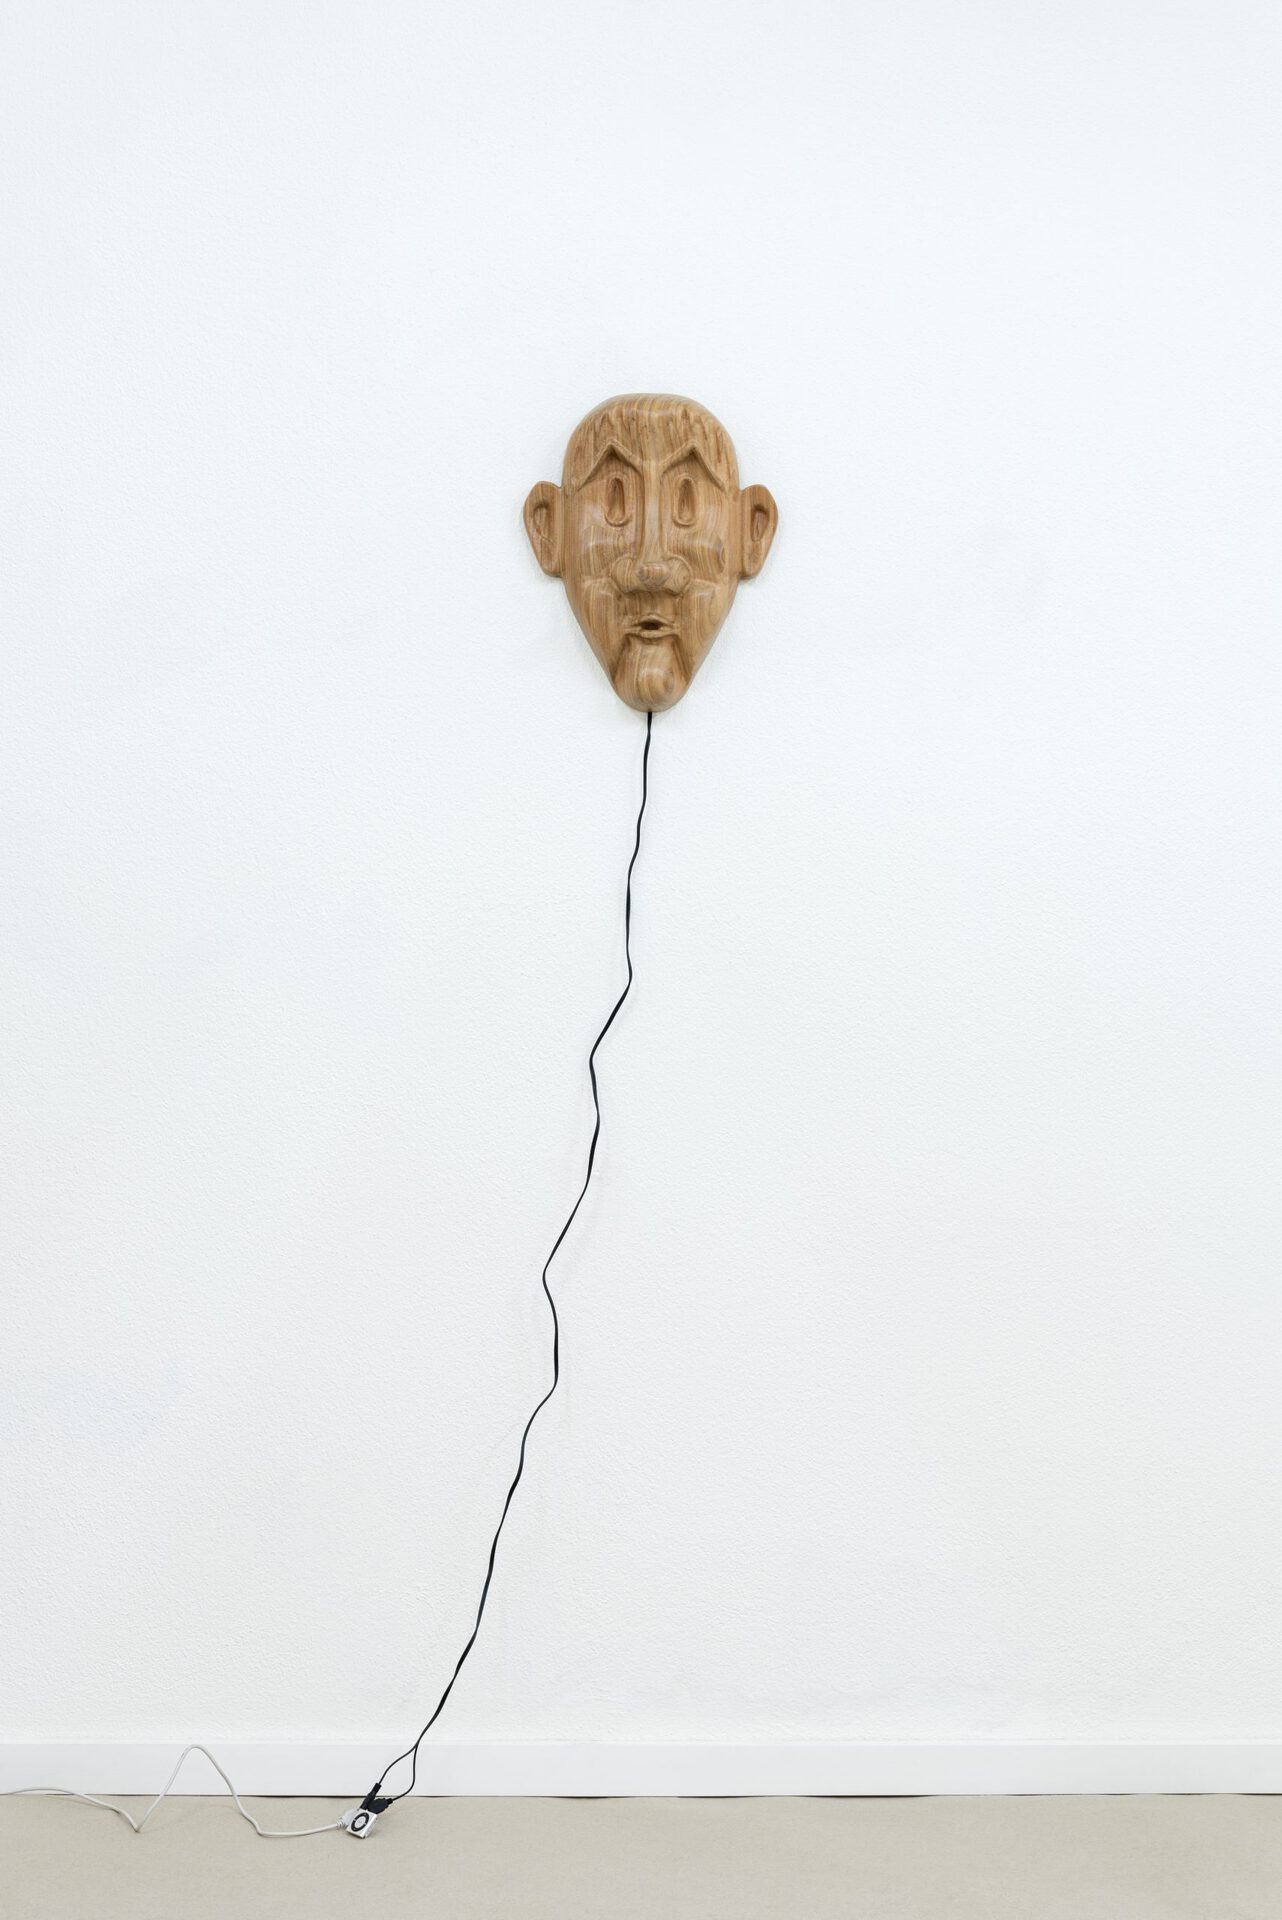 Francesco De Bernardi,  “Untitled (FIU FIU)” Solid afromosia wood,
loudspeakers, electronic
electronic components, MP3, whistle in loop,
36,5 x 41 x 13 cm, 2022